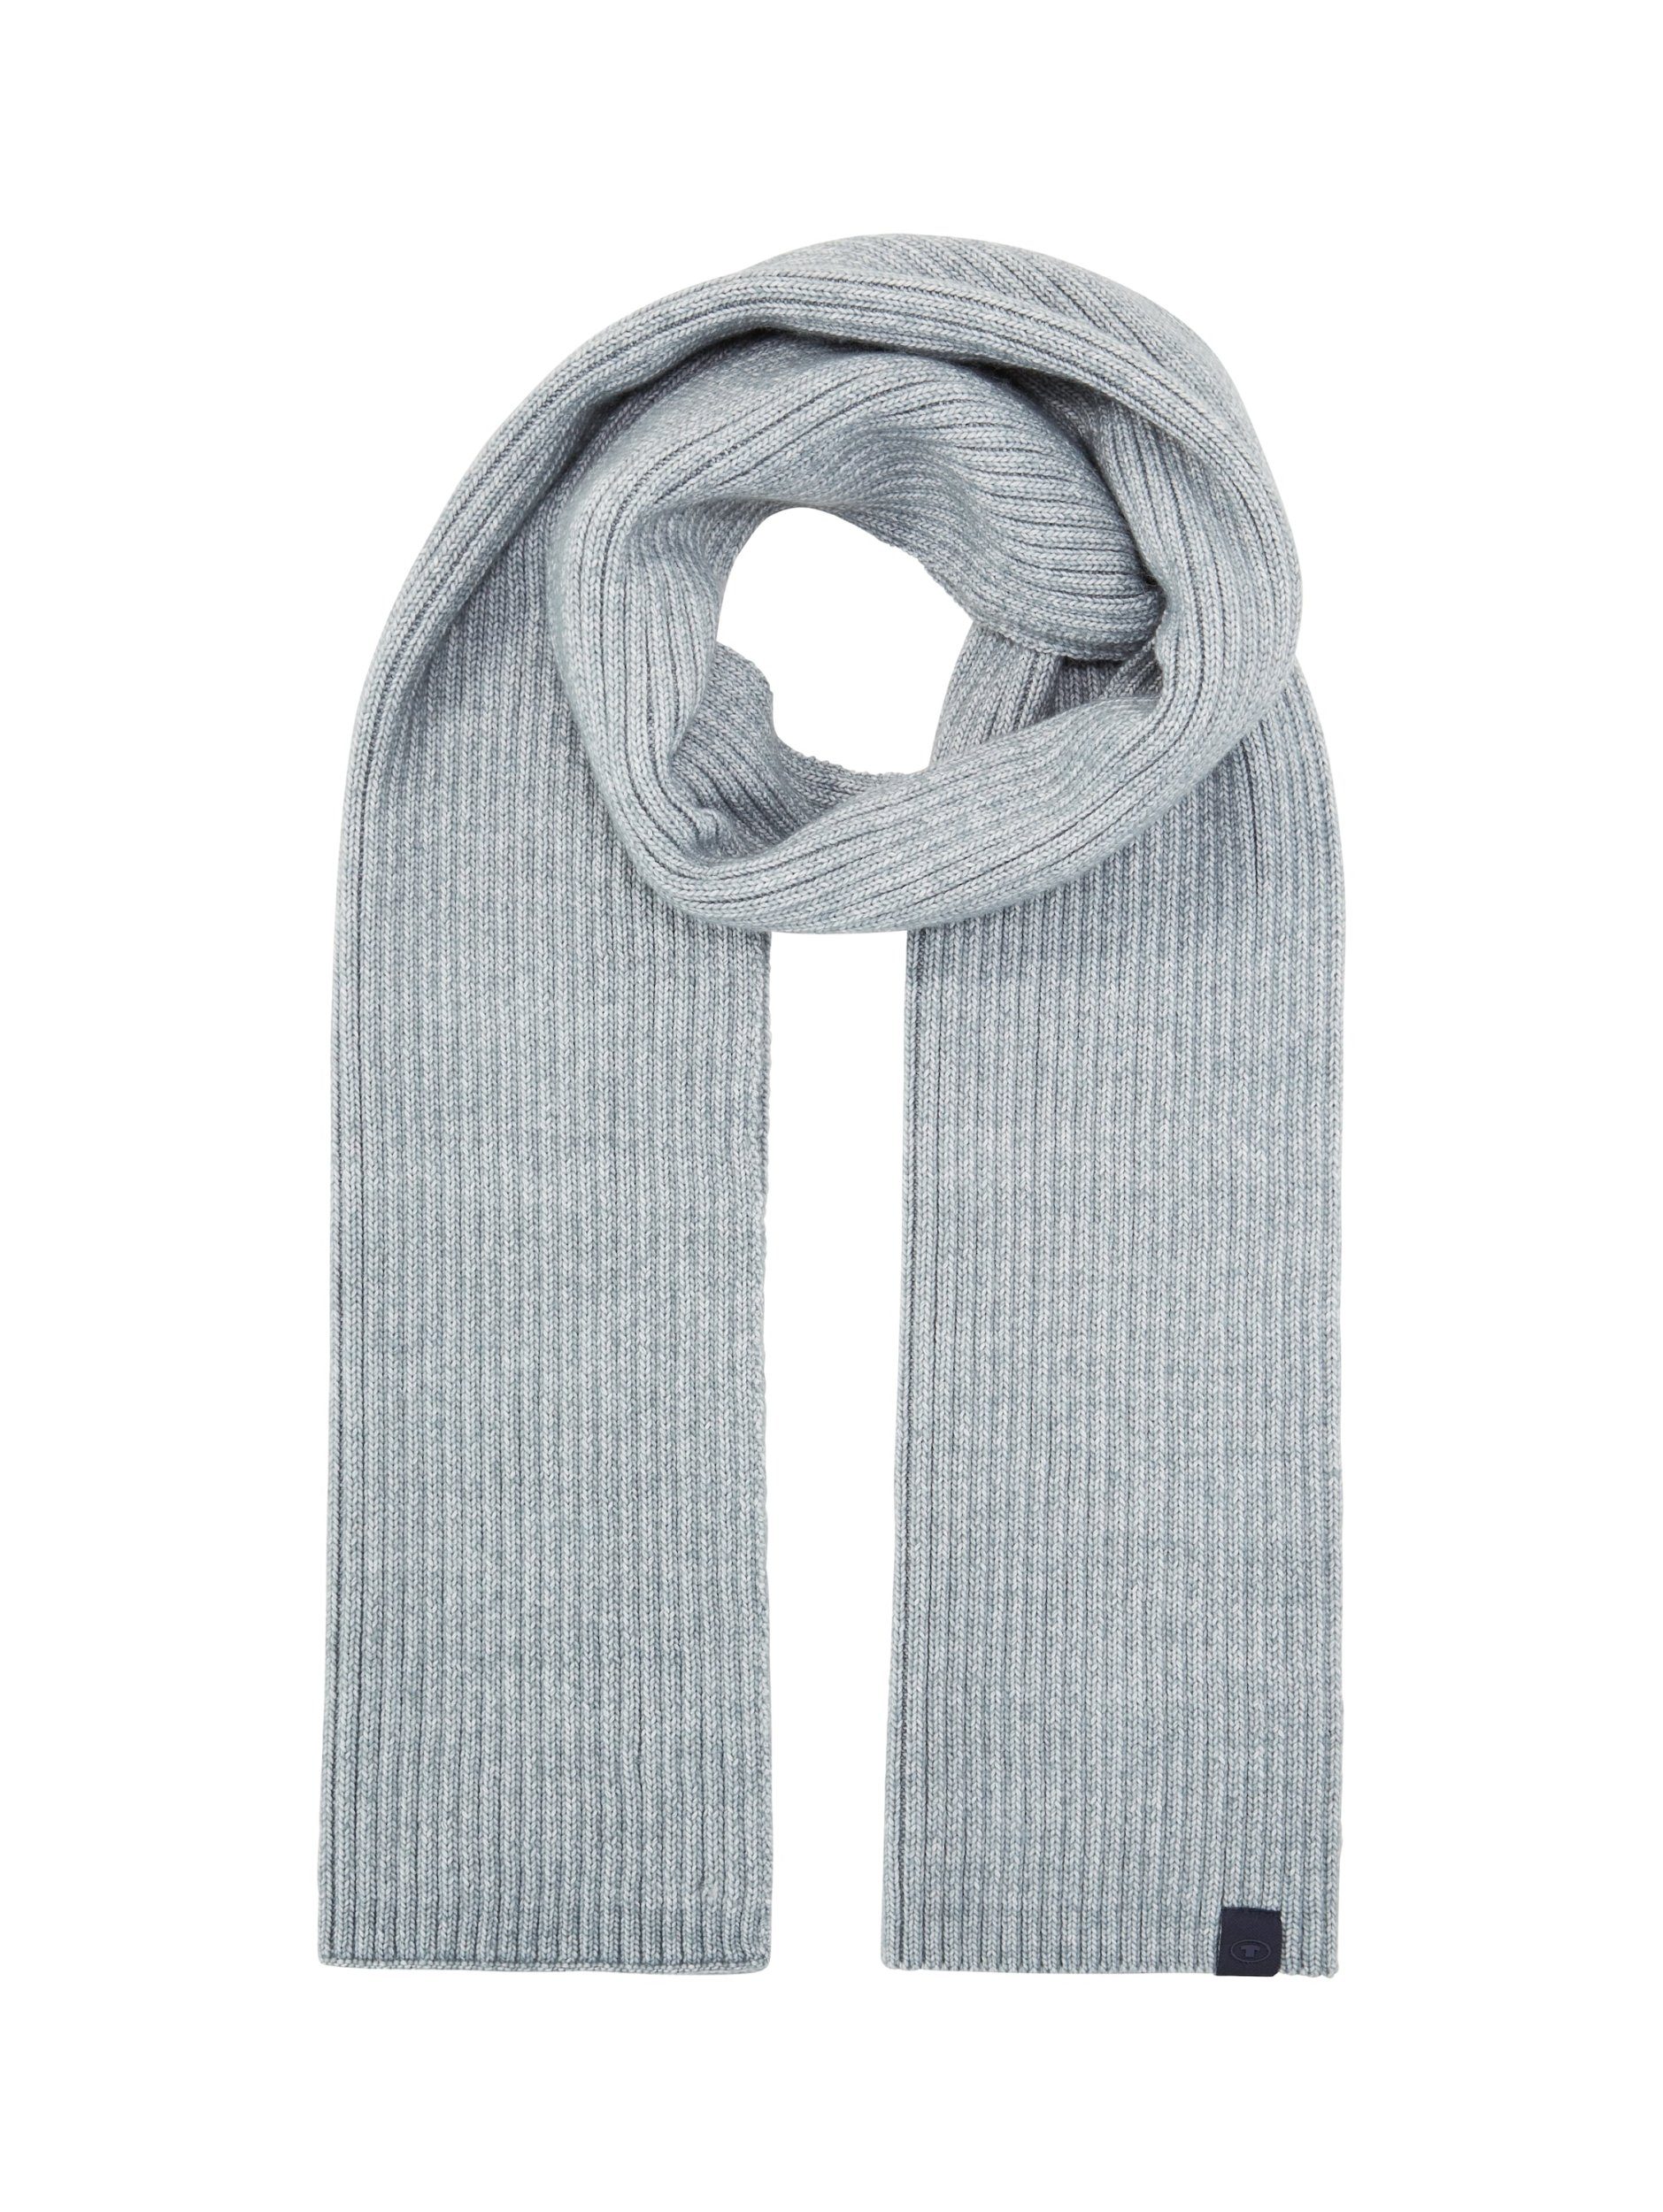 Modeschal knitted mint grey TAILOR cosy TOM scarf